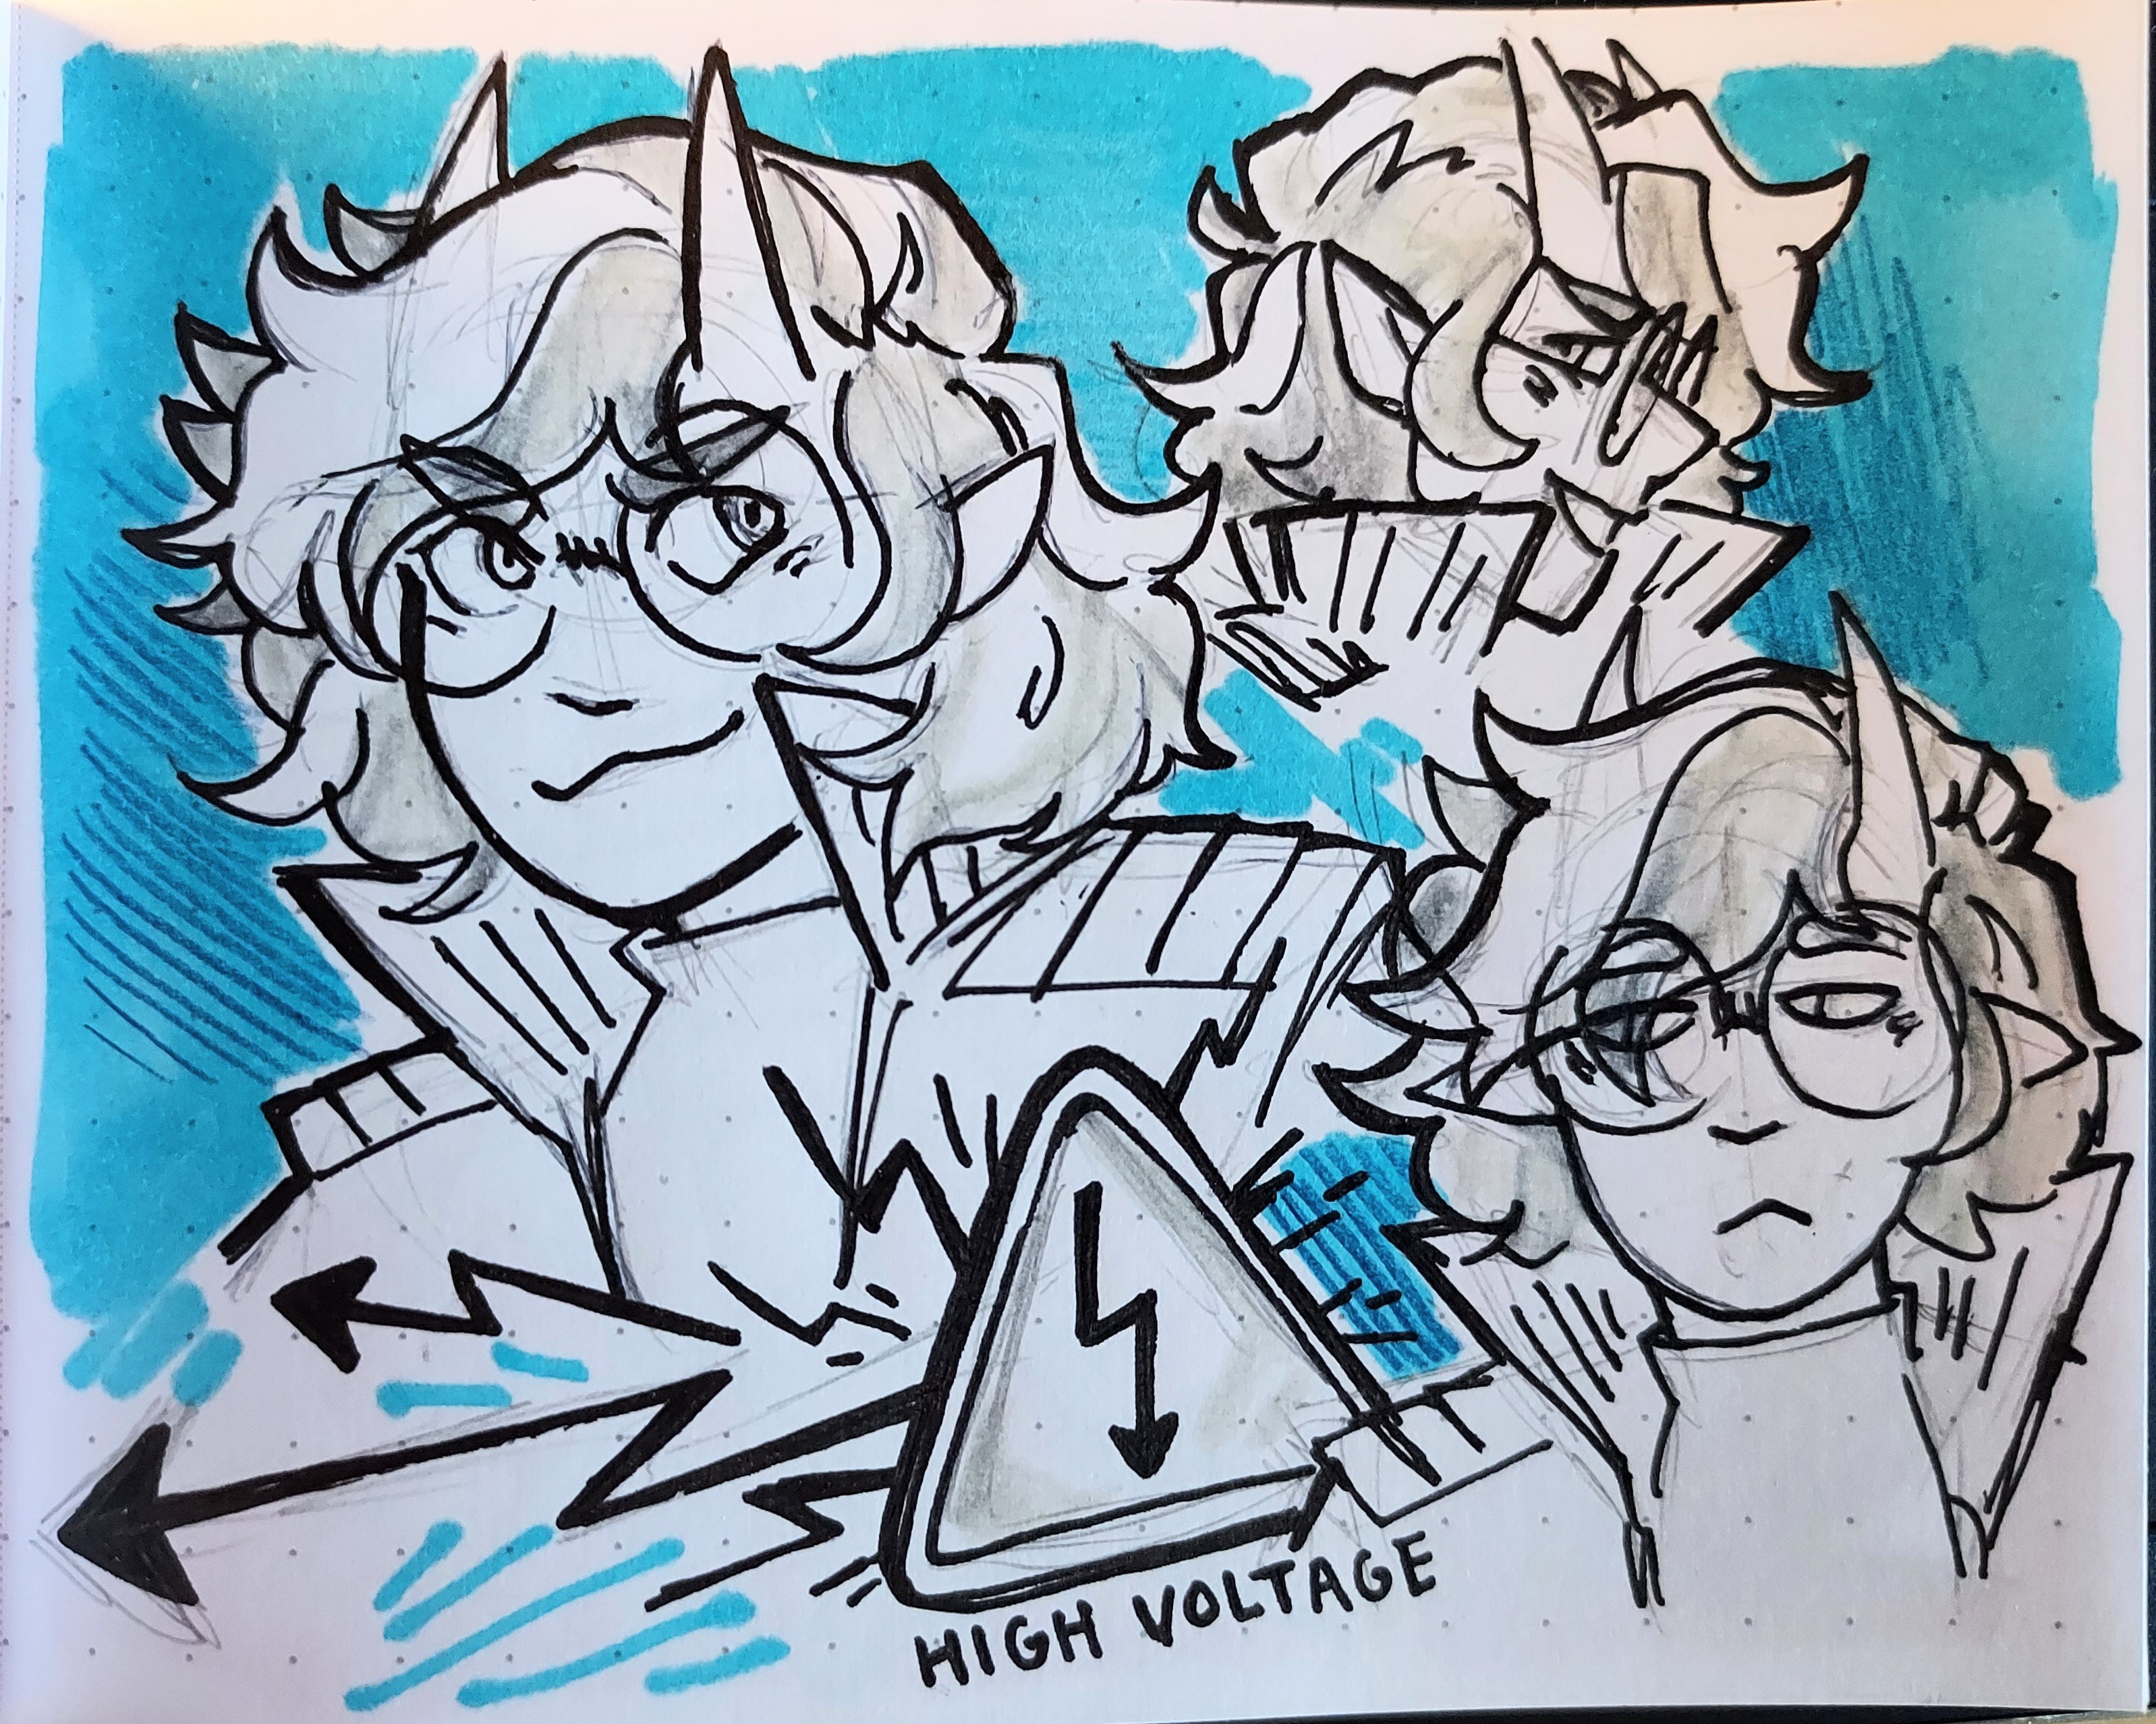 Page 2: Three busts of Essex, a horned woman with wavy black and white hair, round glasses, and a jacket with a popped collar. The background is colored electric blue. At the bottom, a sign labeled 'High Voltage' sits at an angle as lightning-like arrows emerge from it.